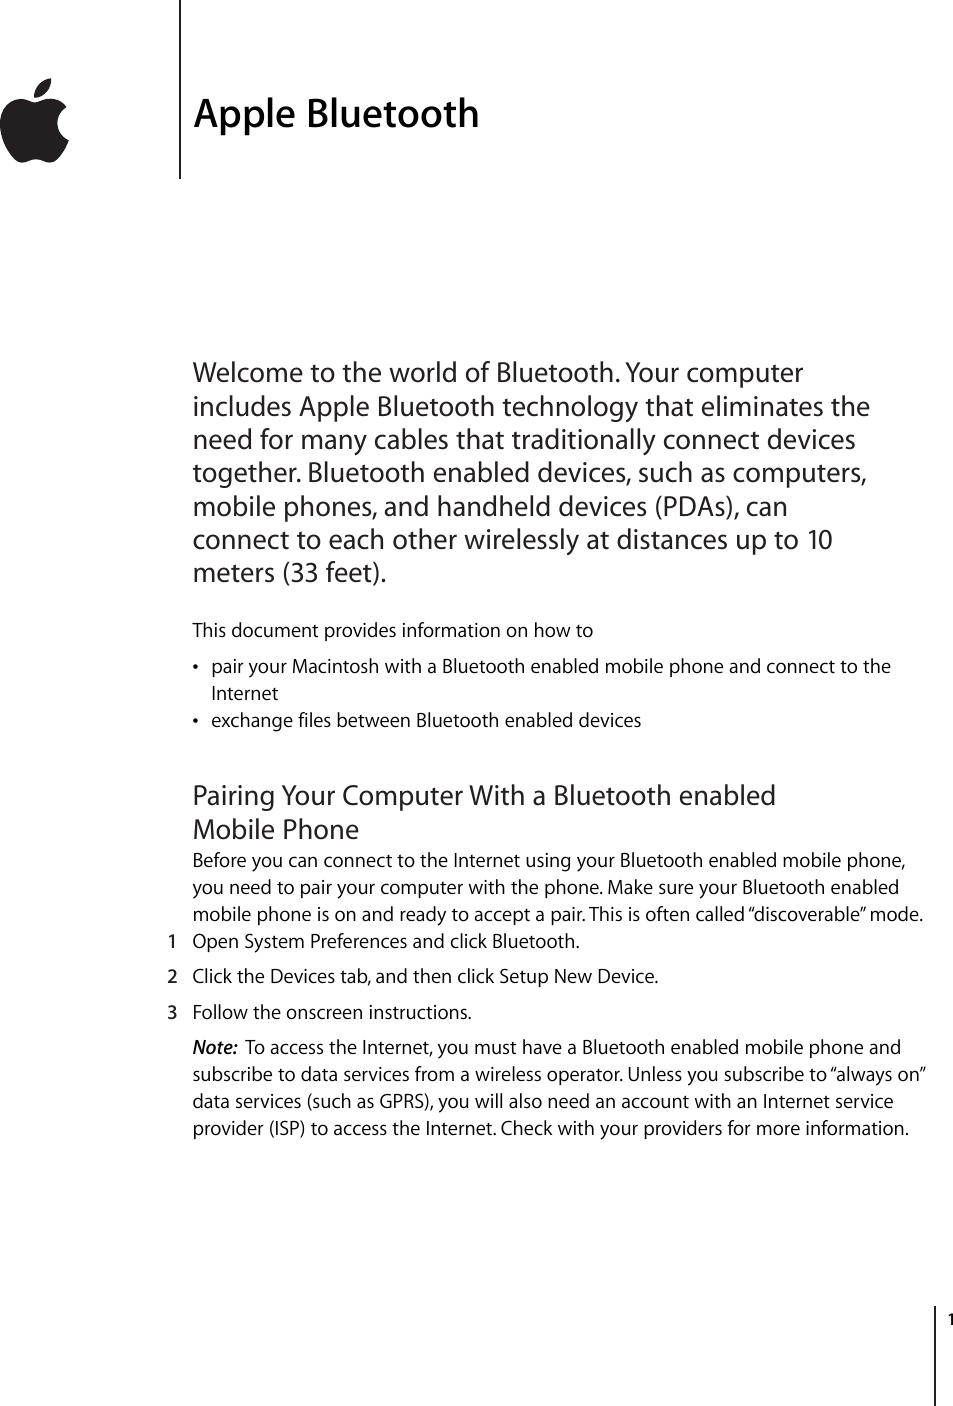         1 1 Apple Bluetooth Welcome to the world of Bluetooth. Your computer includes Apple Bluetooth technology that eliminates the need for many cables that traditionally connect devices together. Bluetooth enabled devices, such as computers, mobile phones, and handheld devices (PDAs), can connect to each other wirelessly at distances up to 10 meters (33 feet). This document provides information on how to • pair your Macintosh with a Bluetooth enabled mobile phone and connect to the Internet  • exchange files between Bluetooth enabled devices Pairing Your Computer With a Bluetooth enabled Mobile Phone Before you can connect to the Internet using your Bluetooth enabled mobile phone, you need to pair your computer with the phone. Make sure your Bluetooth enabled mobile phone is on and ready to accept a pair. This is often called “discoverable” mode.  1 Open System Preferences and click Bluetooth. 2 Click the Devices tab, and then click Setup New Device. 3 Follow the onscreen instructions. Note:   To access the Internet, you must have a Bluetooth enabled mobile phone and subscribe to data services from a wireless operator. Unless you subscribe to “always on” data services (such as GPRS), you will also need an account with an Internet service provider (ISP) to access the Internet. Check with your providers for more information.